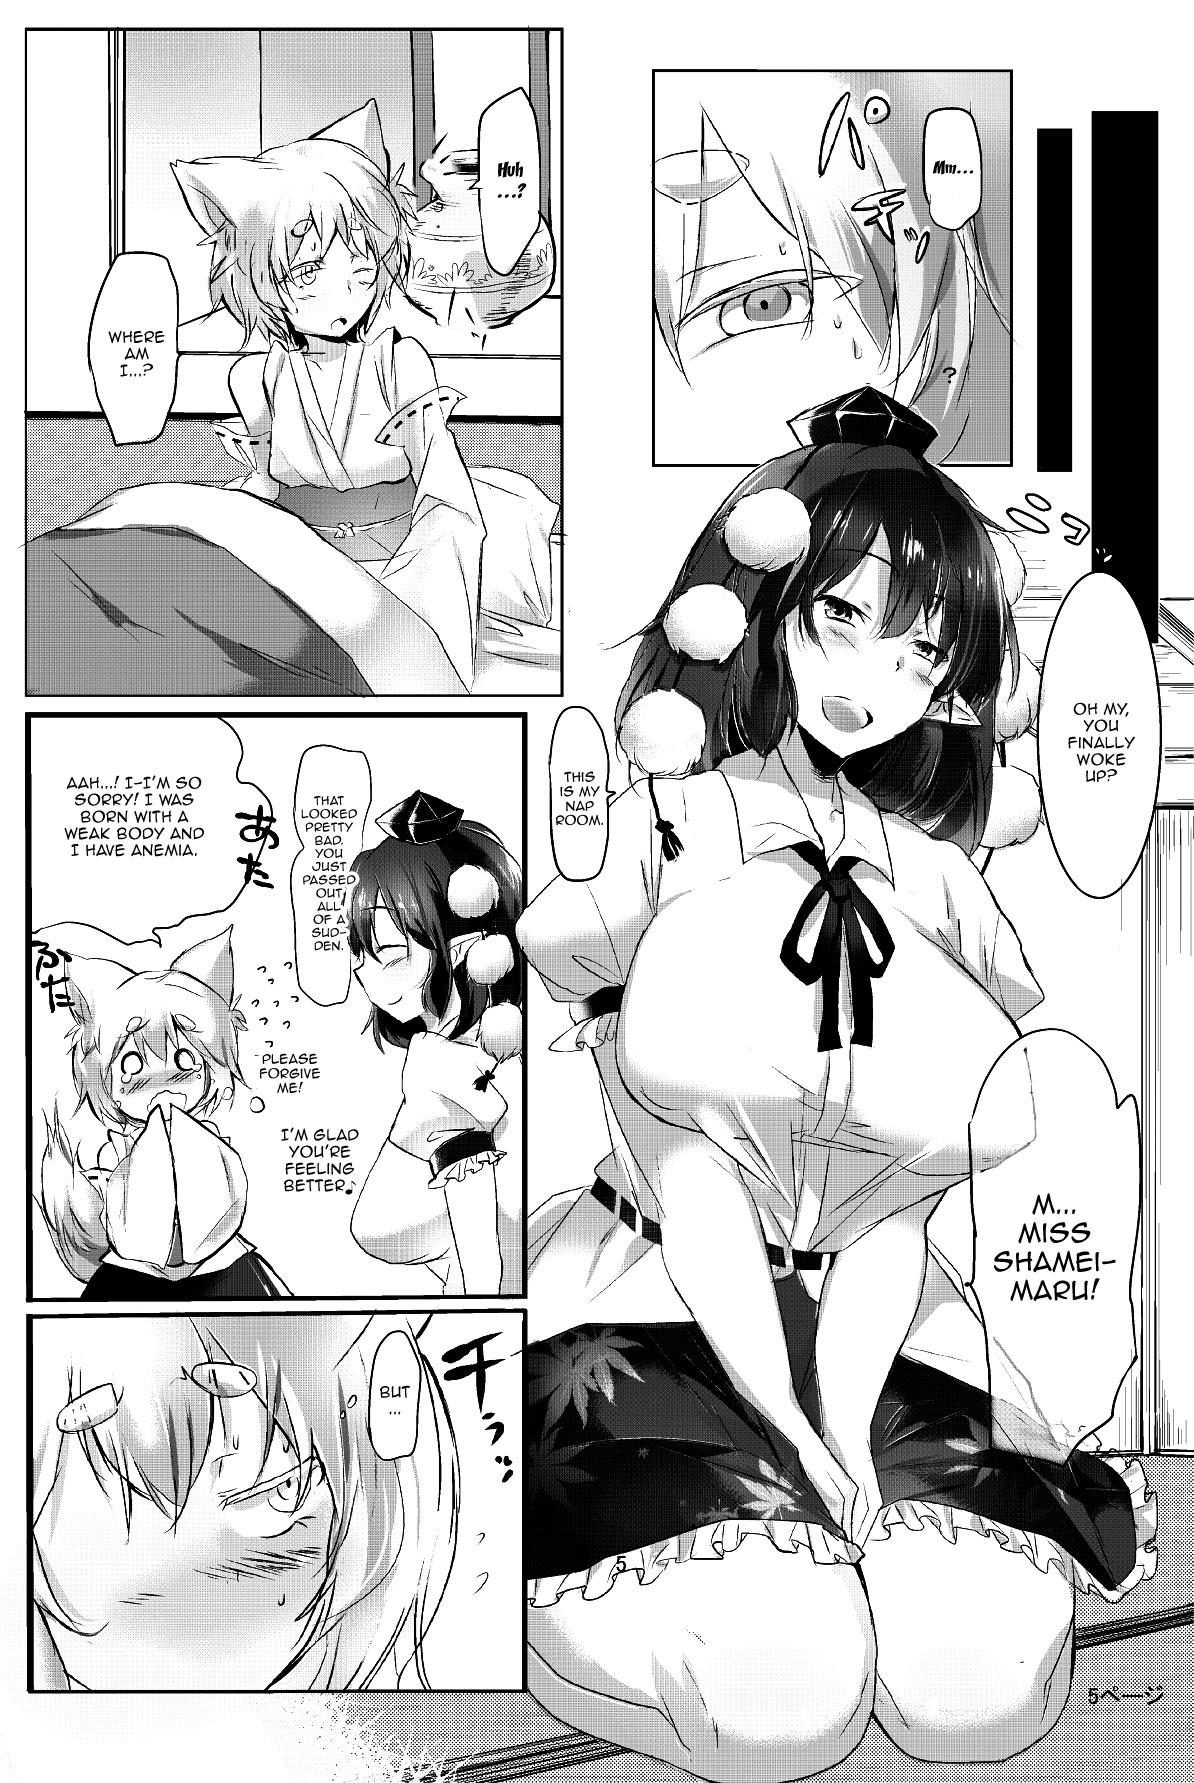 Spreading AyaMomi Sand Orgasm - Touhou project Mexicana - Page 6